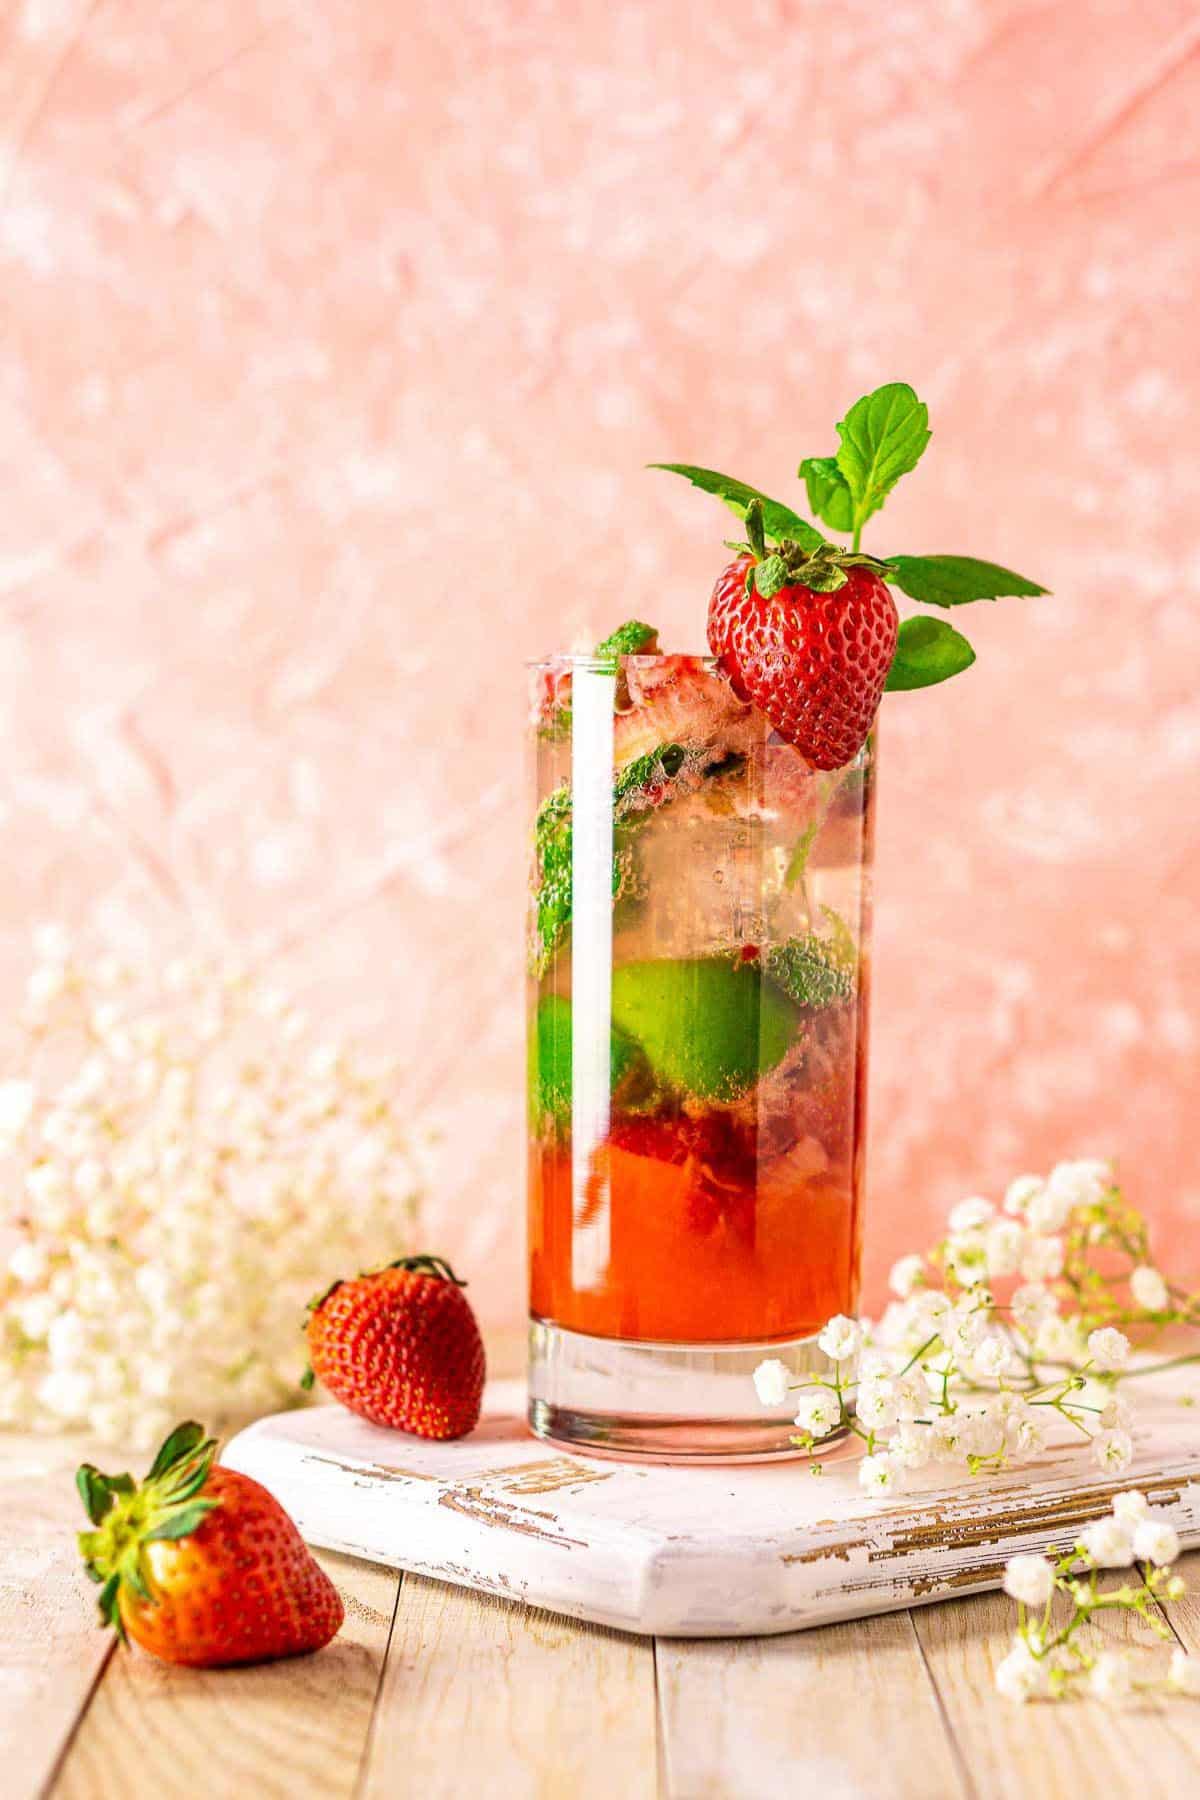 A strawberry mojito on a white wooden serving tray with strawberries and flowers around it against a pink background.